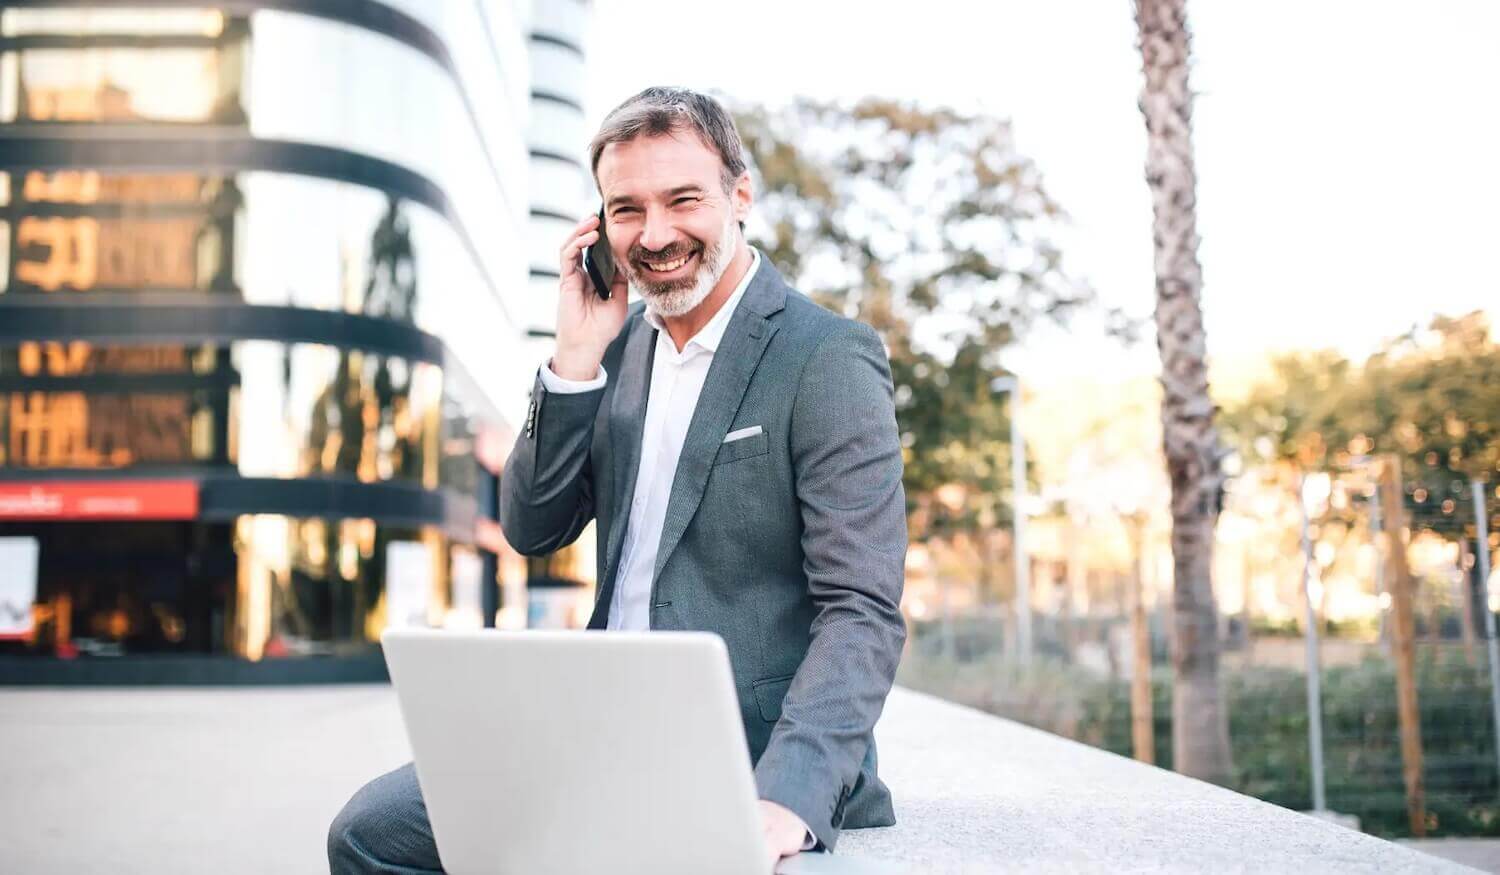 Financial Services CEO Sitting On Wall With City Backdrop Smiling On Phone With Laptop (1) (1)